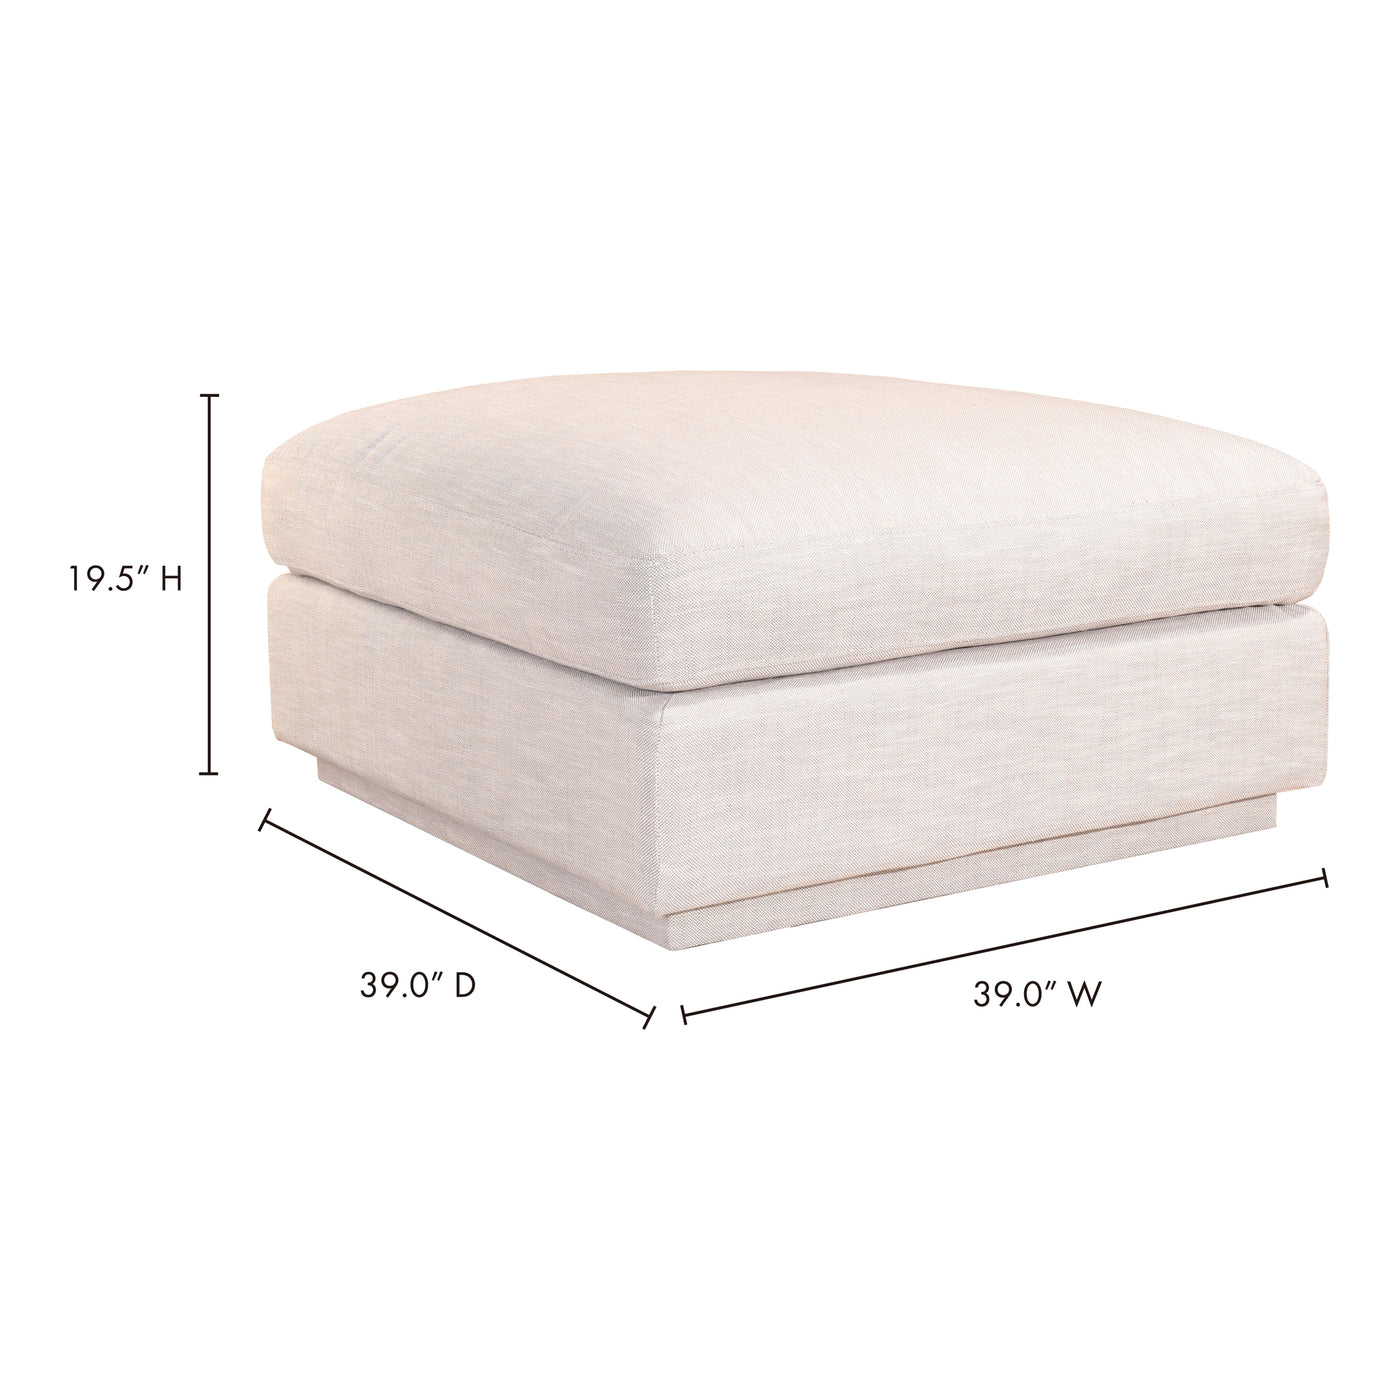 The Justin Ottoman's classic design and soft linen finish make it the perfect addition to your living room. Its pale taupe...